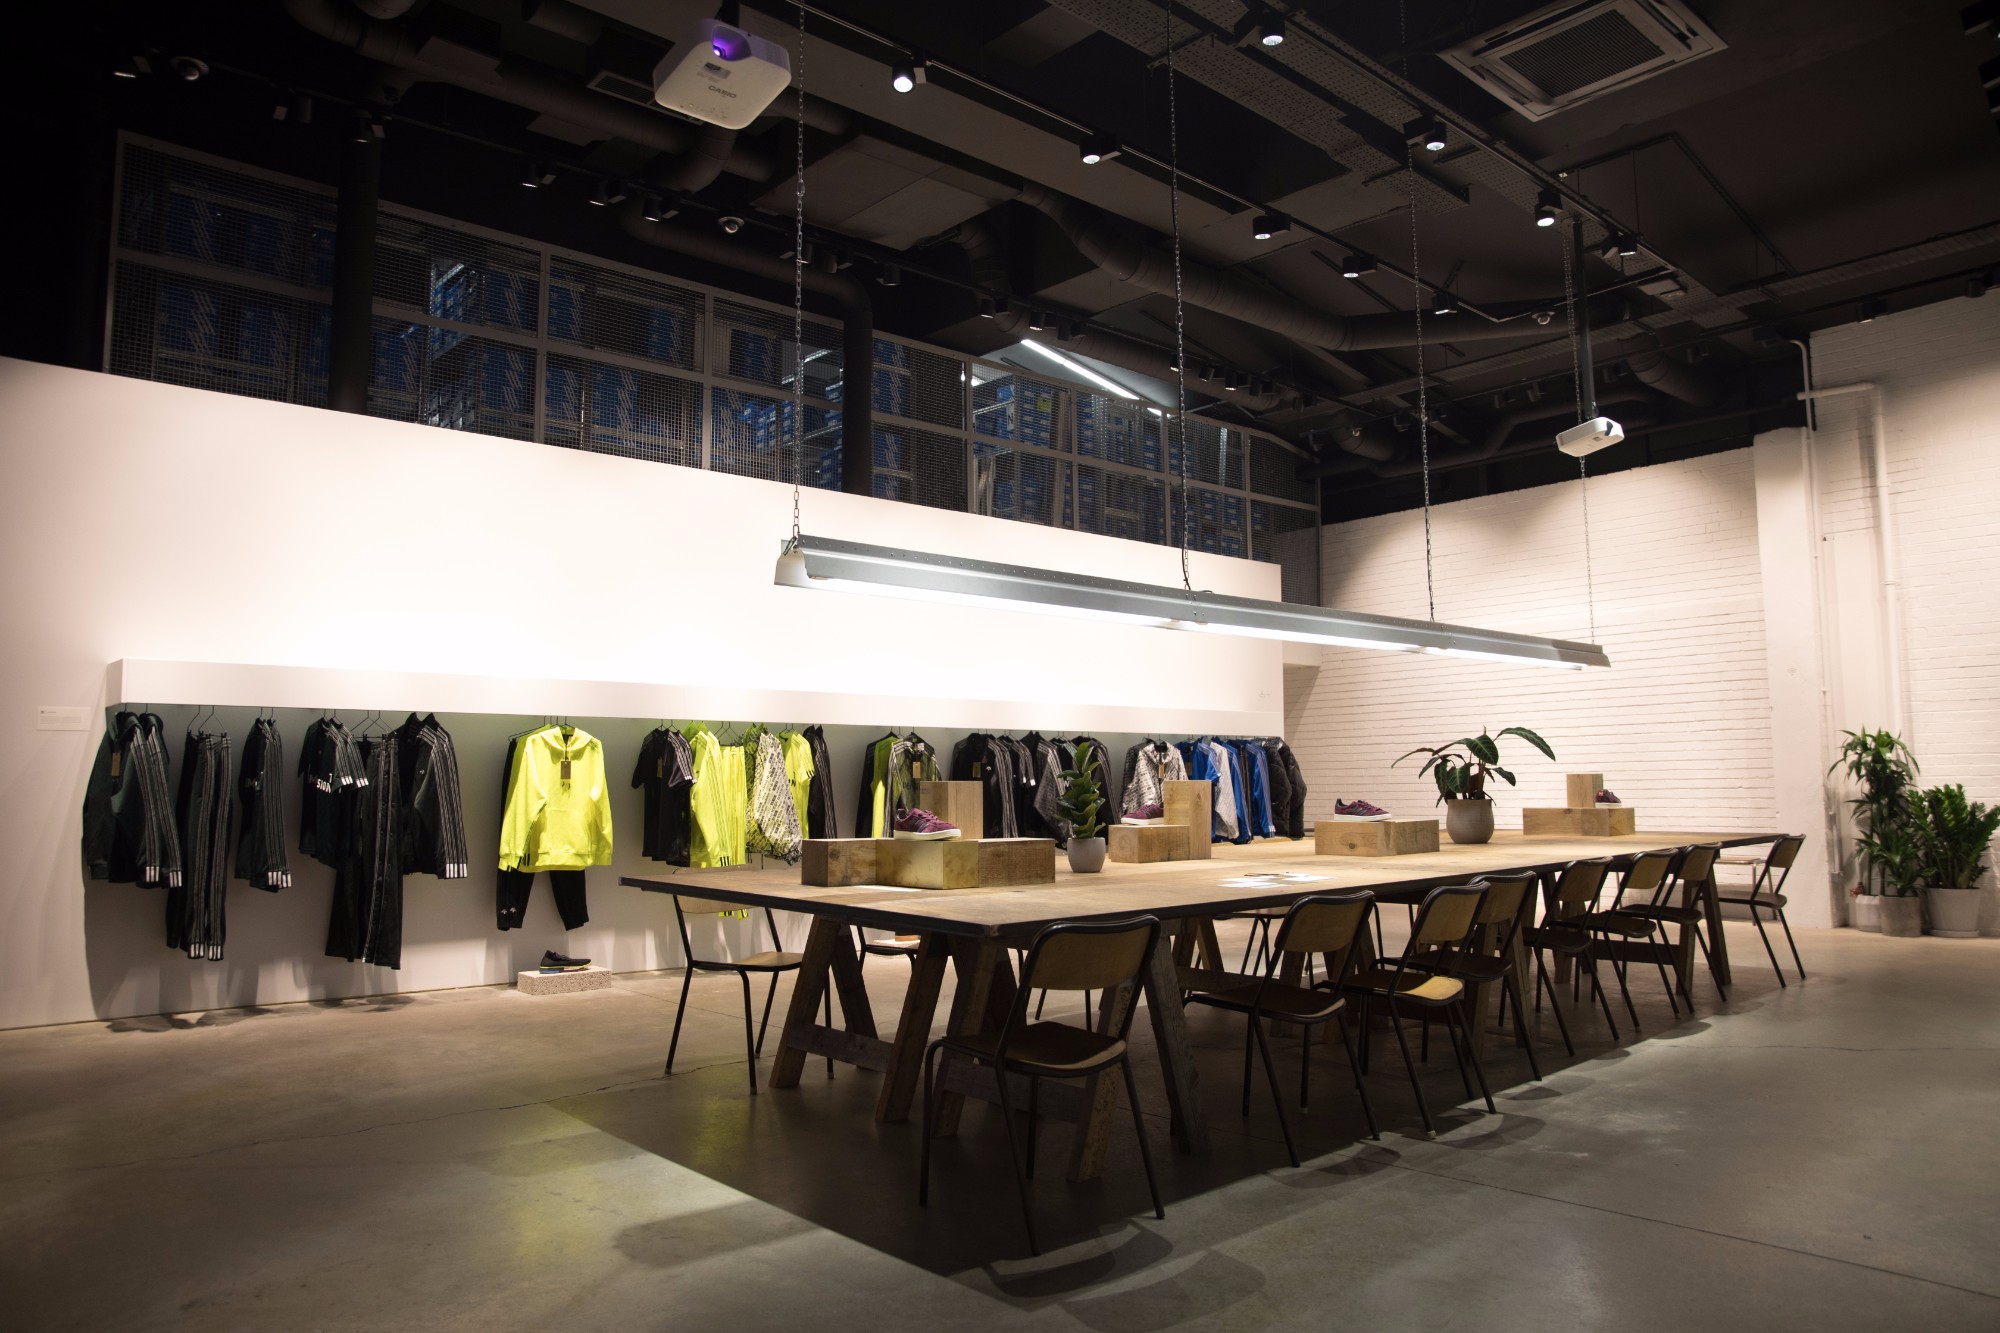 Adidas Originals’ New London Flagship Store is Coming Soon